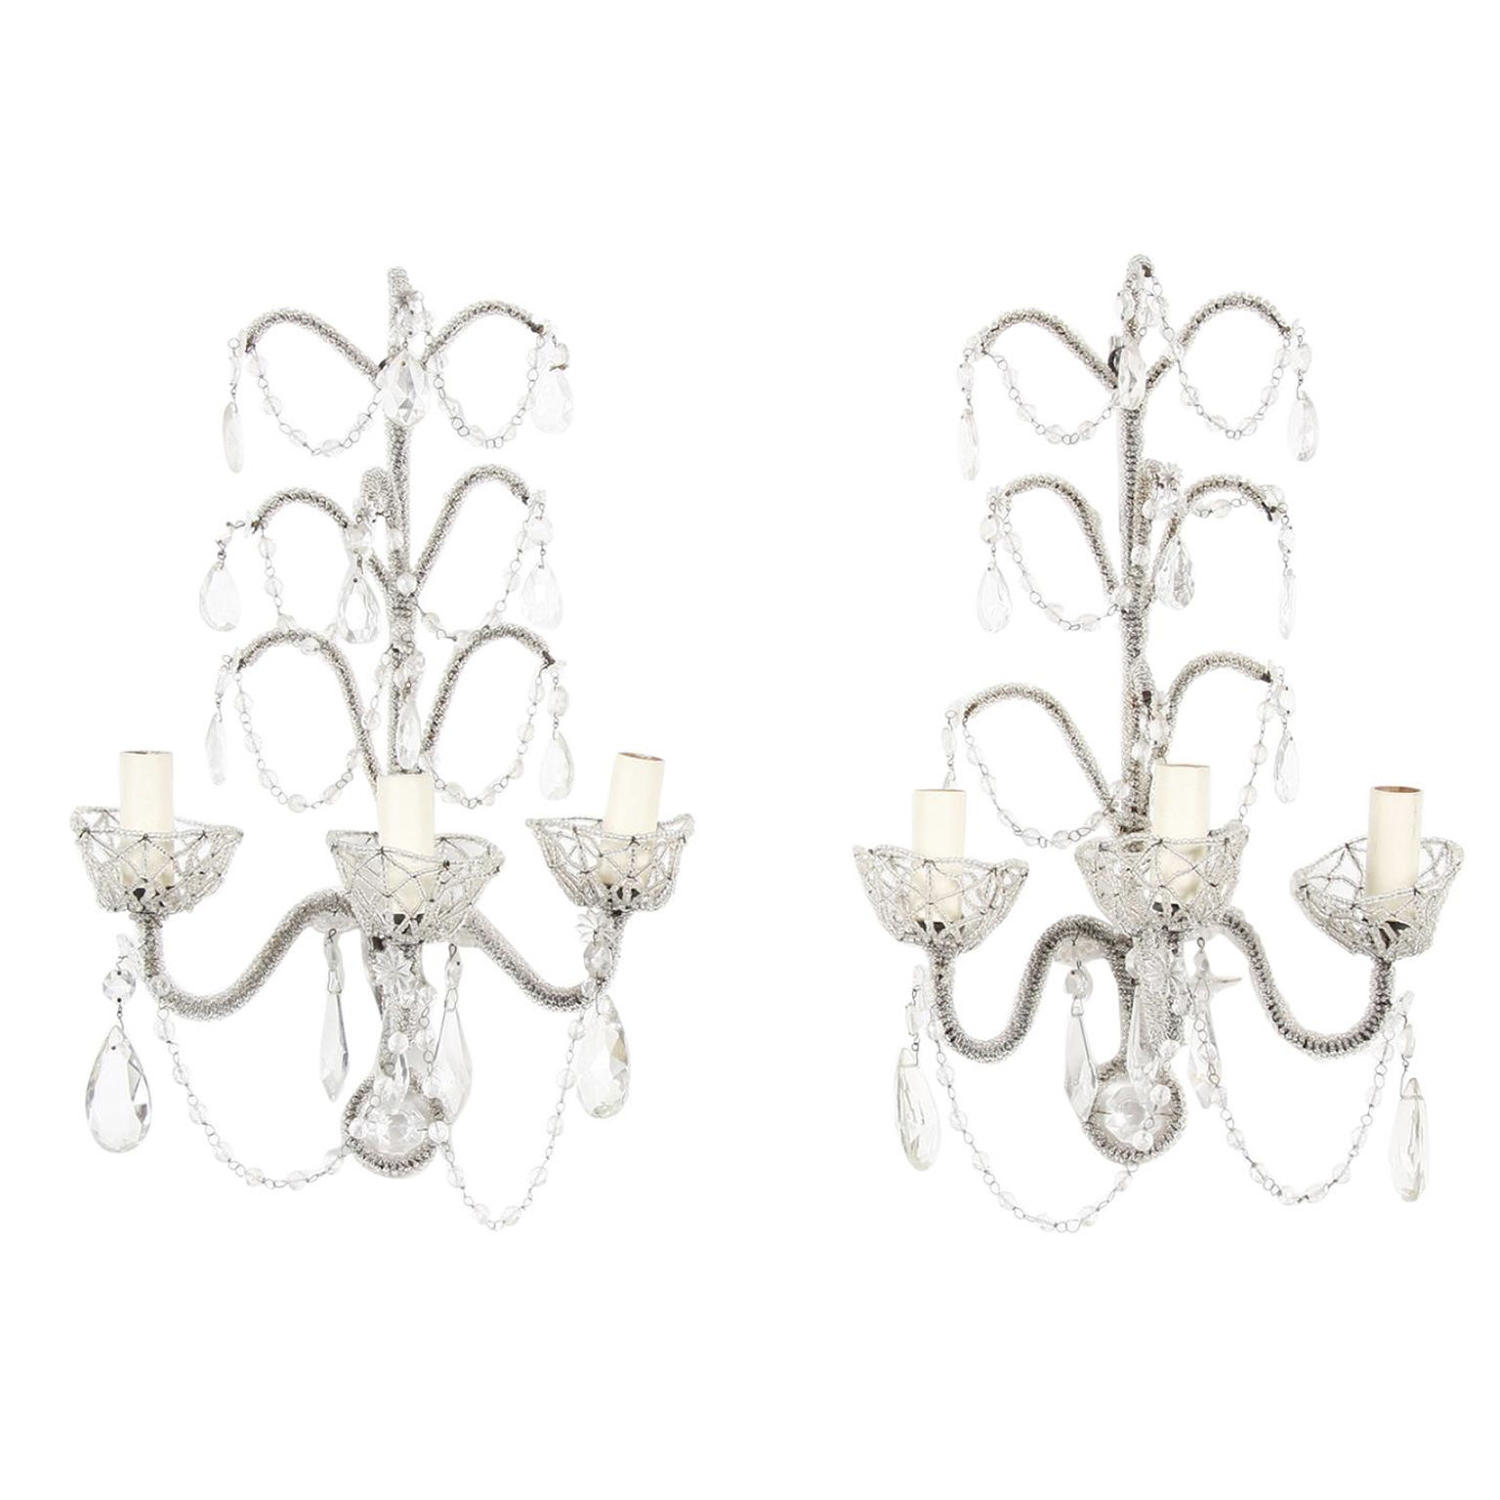 Pair of Bead Encrusted Wall Sconces